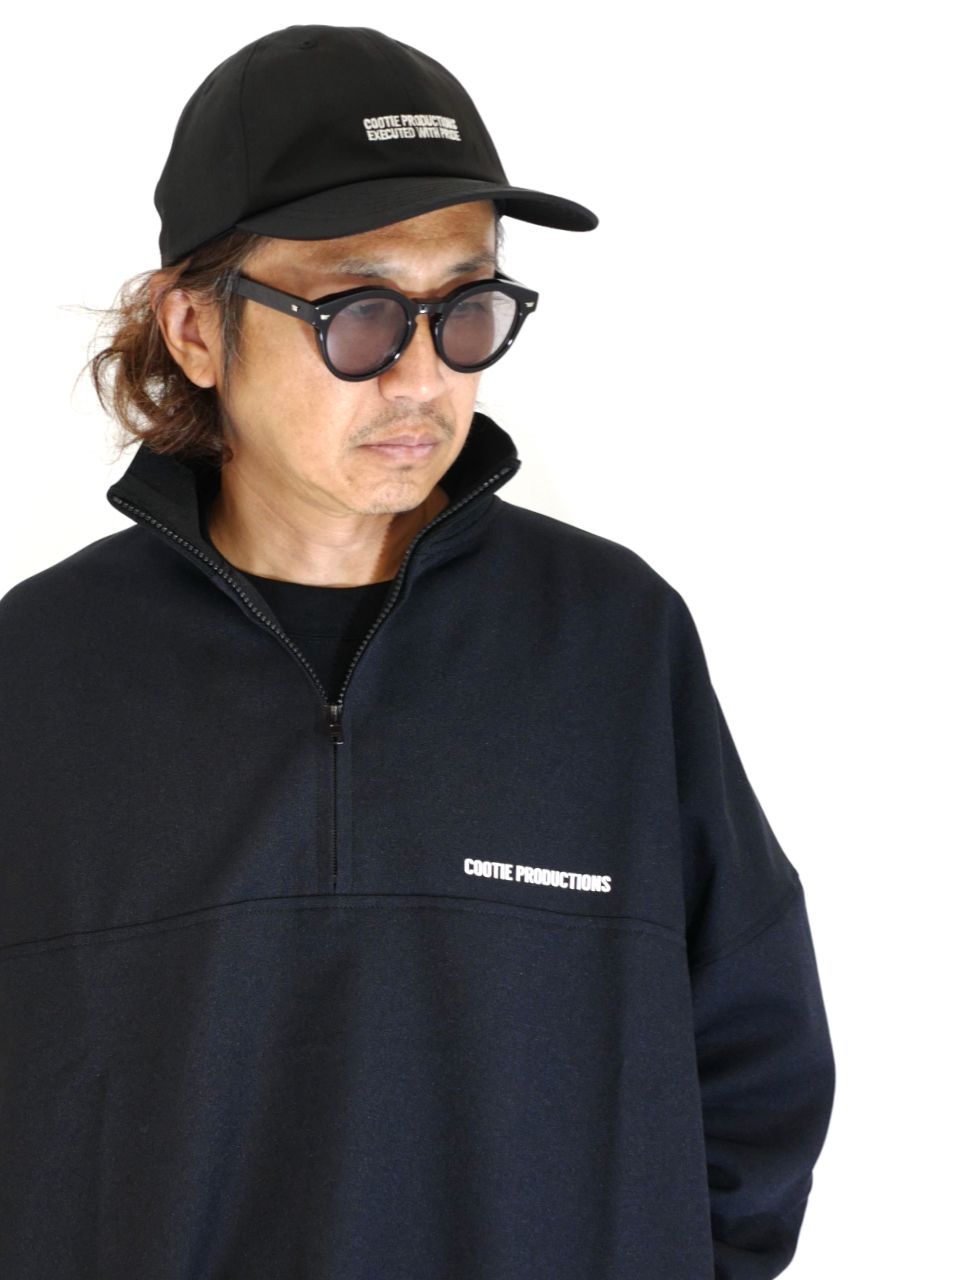 COOTIE PRODUCTIONS - POLYESTER 6 PANEL CAP (BLACK) / ポリエステル